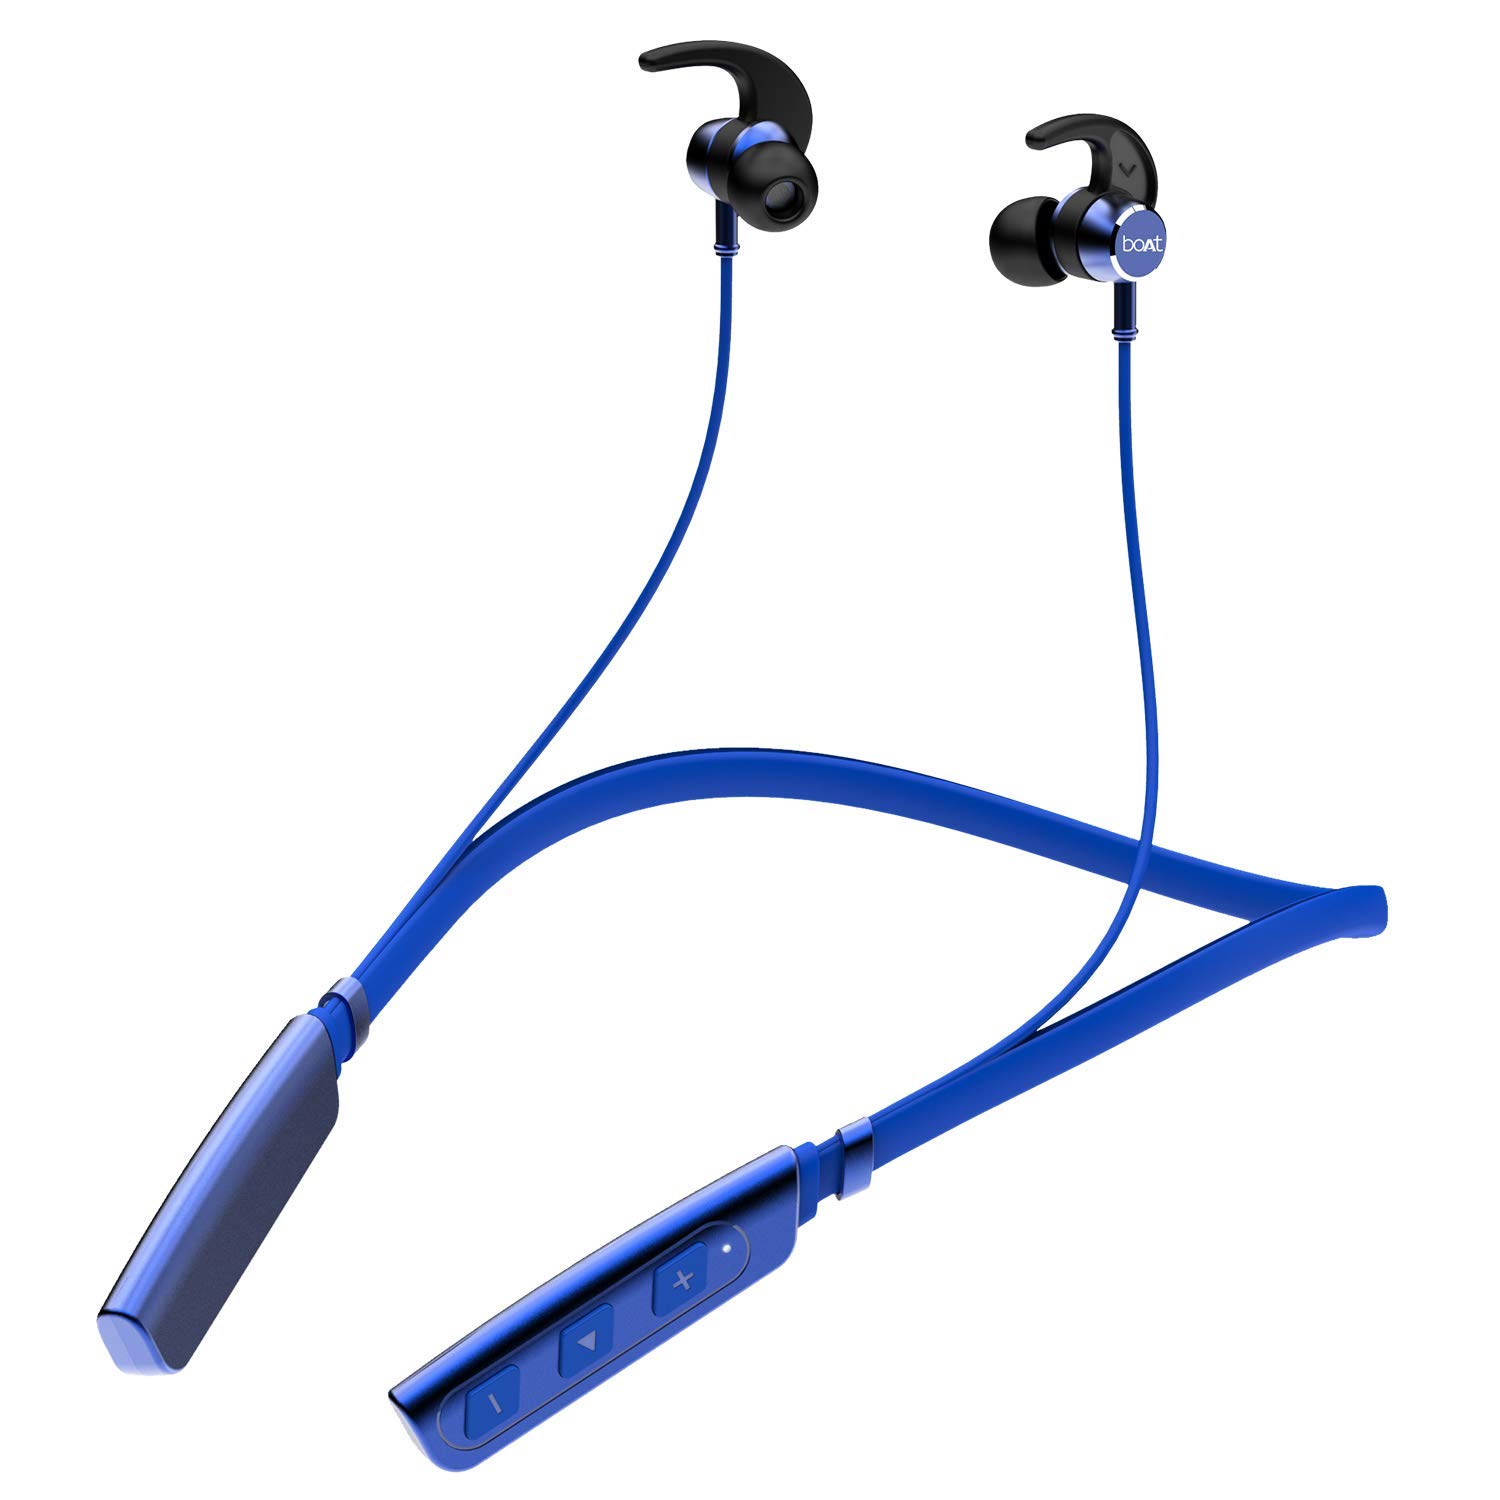 boAt Rockerz 235V2 Bluetooth Wireless In Ear Earphones With Mic With Asap Charge Technology, V5.0, Call Vibration Alert, Magnetic Eartips And Ipx5 Water & Sweat Resistance (Blue) - image 2 of 5